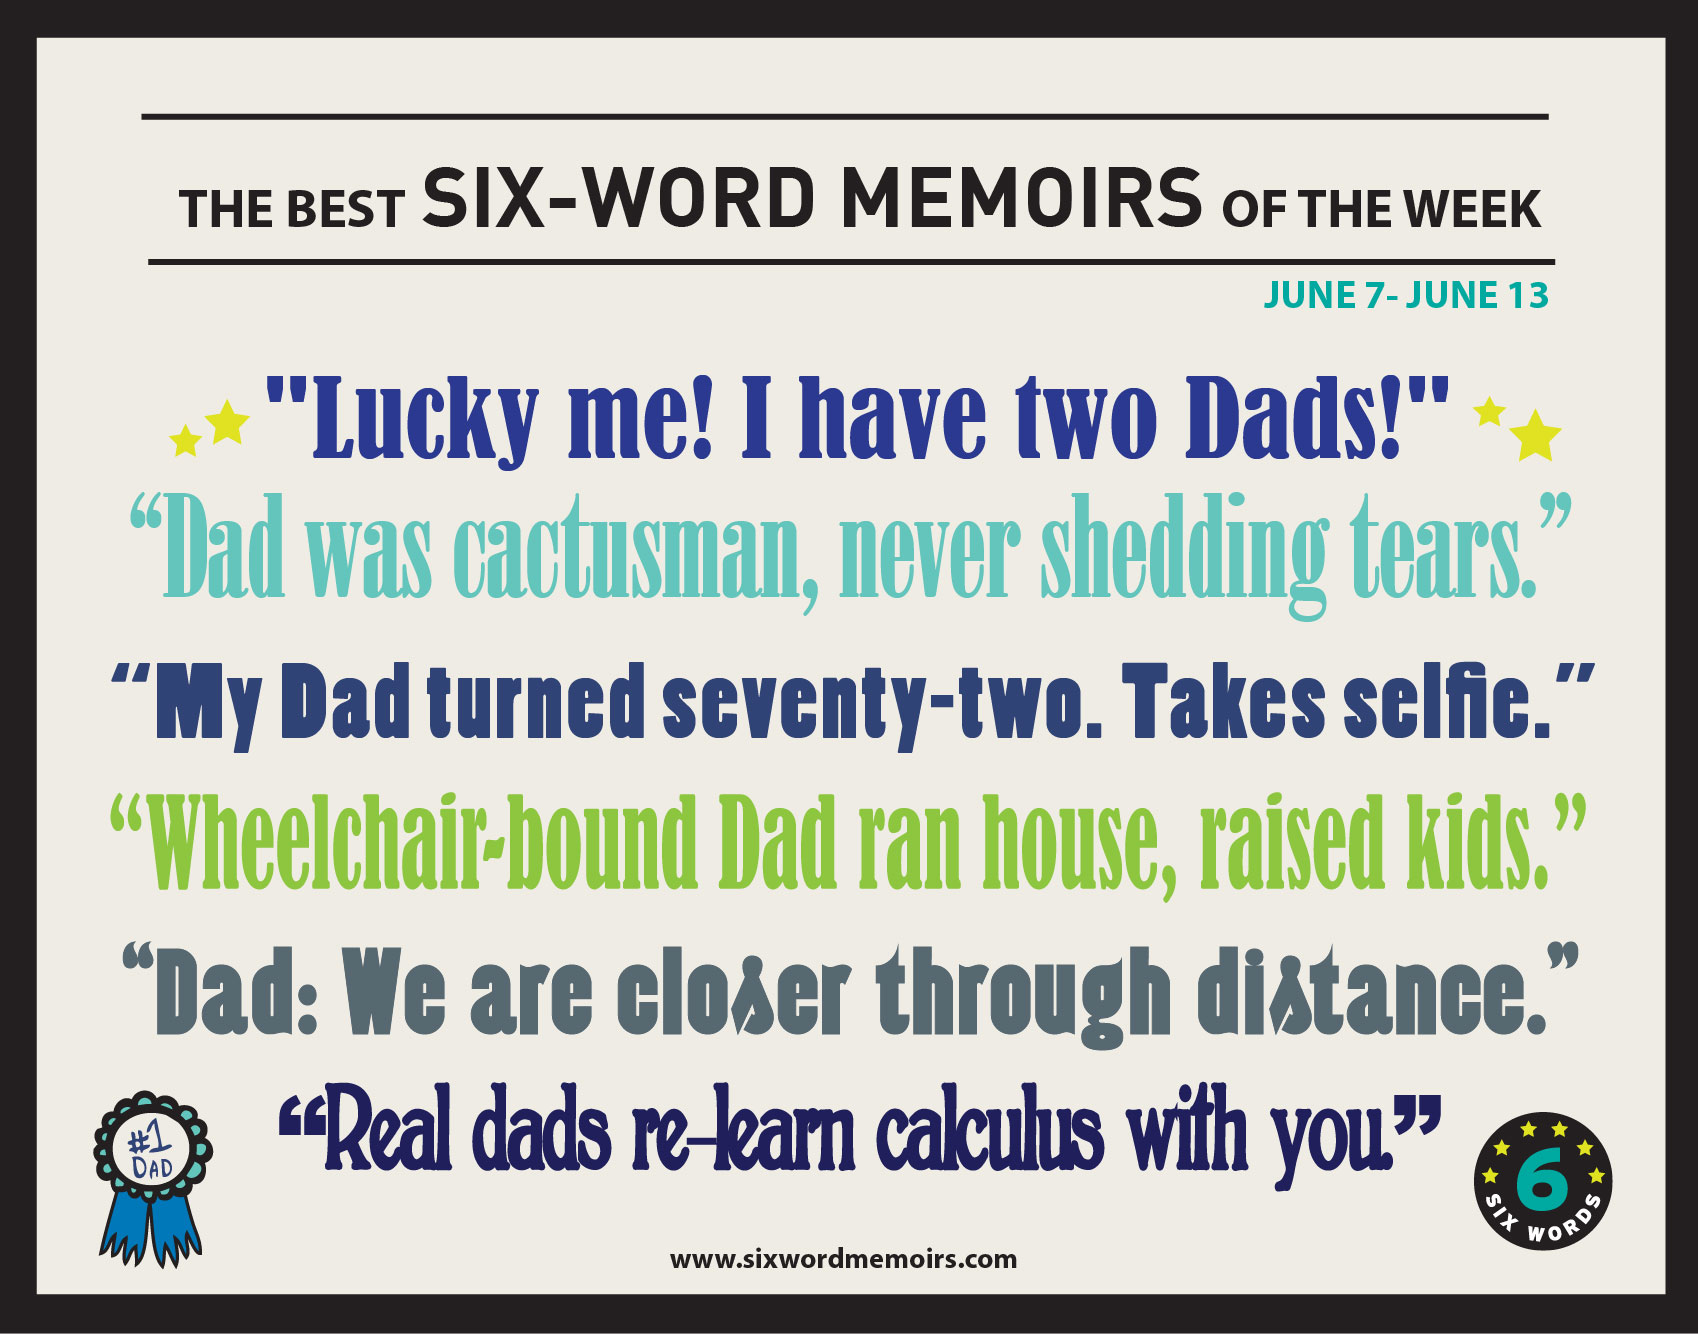 "Dad: We are closer through distance." The Best Six-Word ...